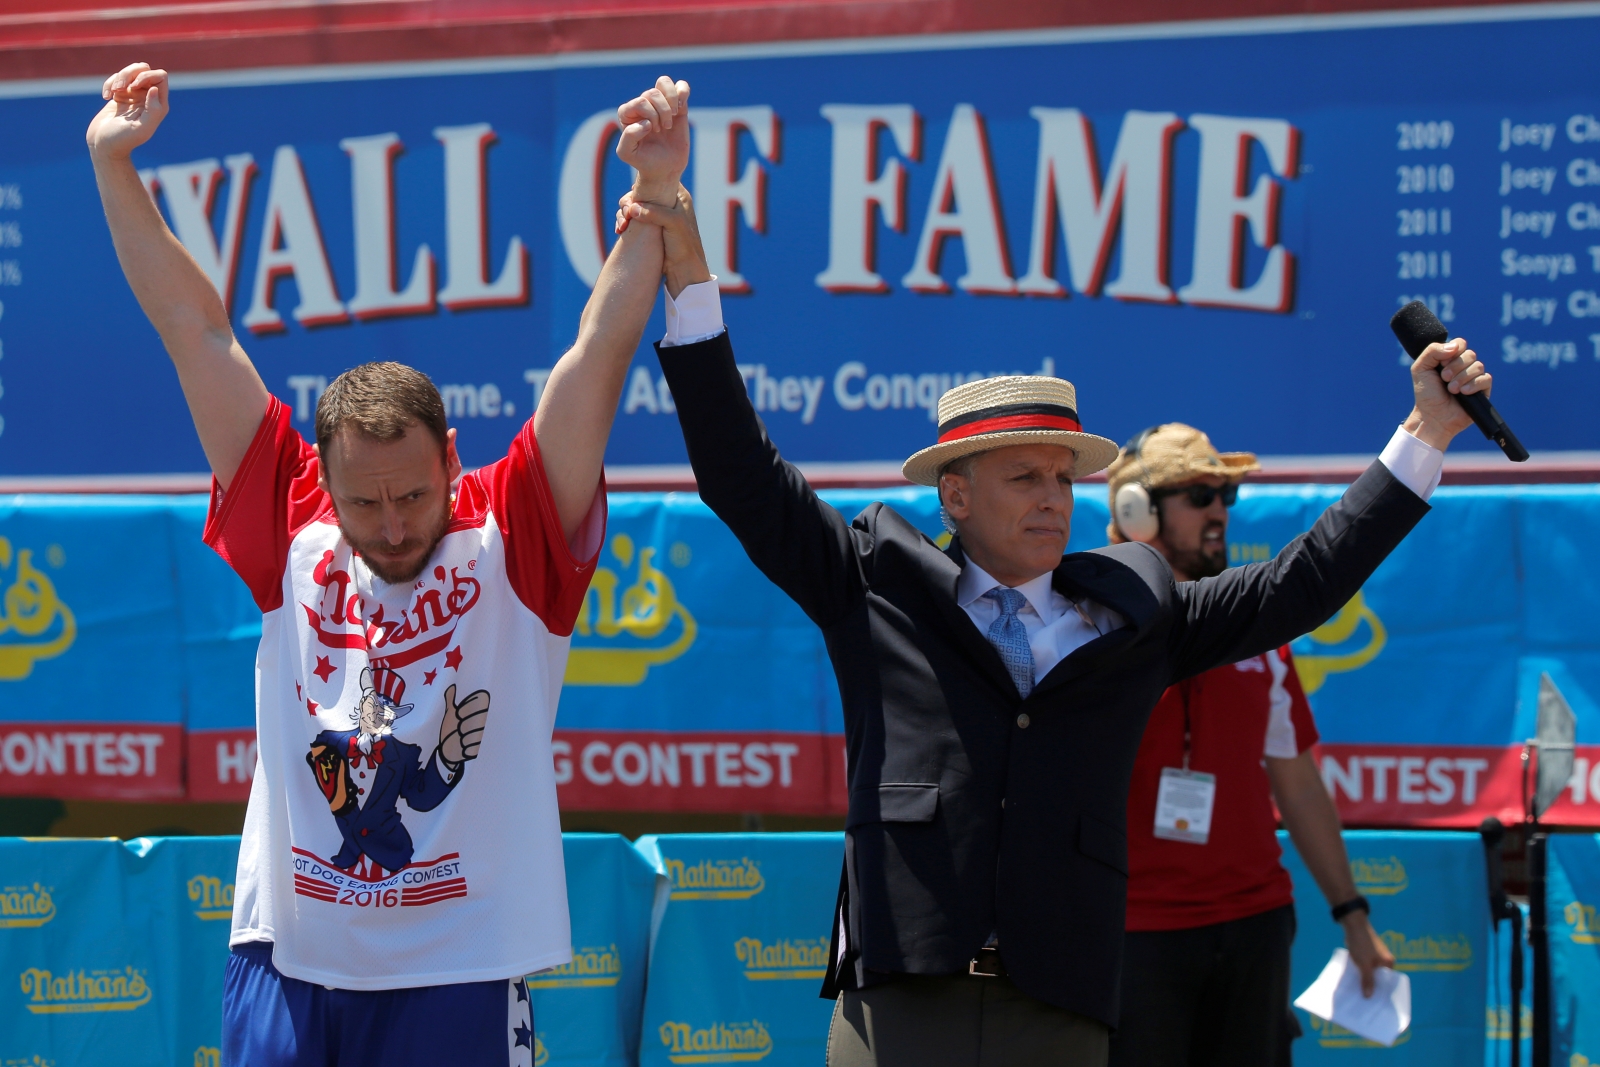 Joey 'Jaws' Chestnut eats recordbreaking 70 hotdogs in 10 minutes in Coney Island contest